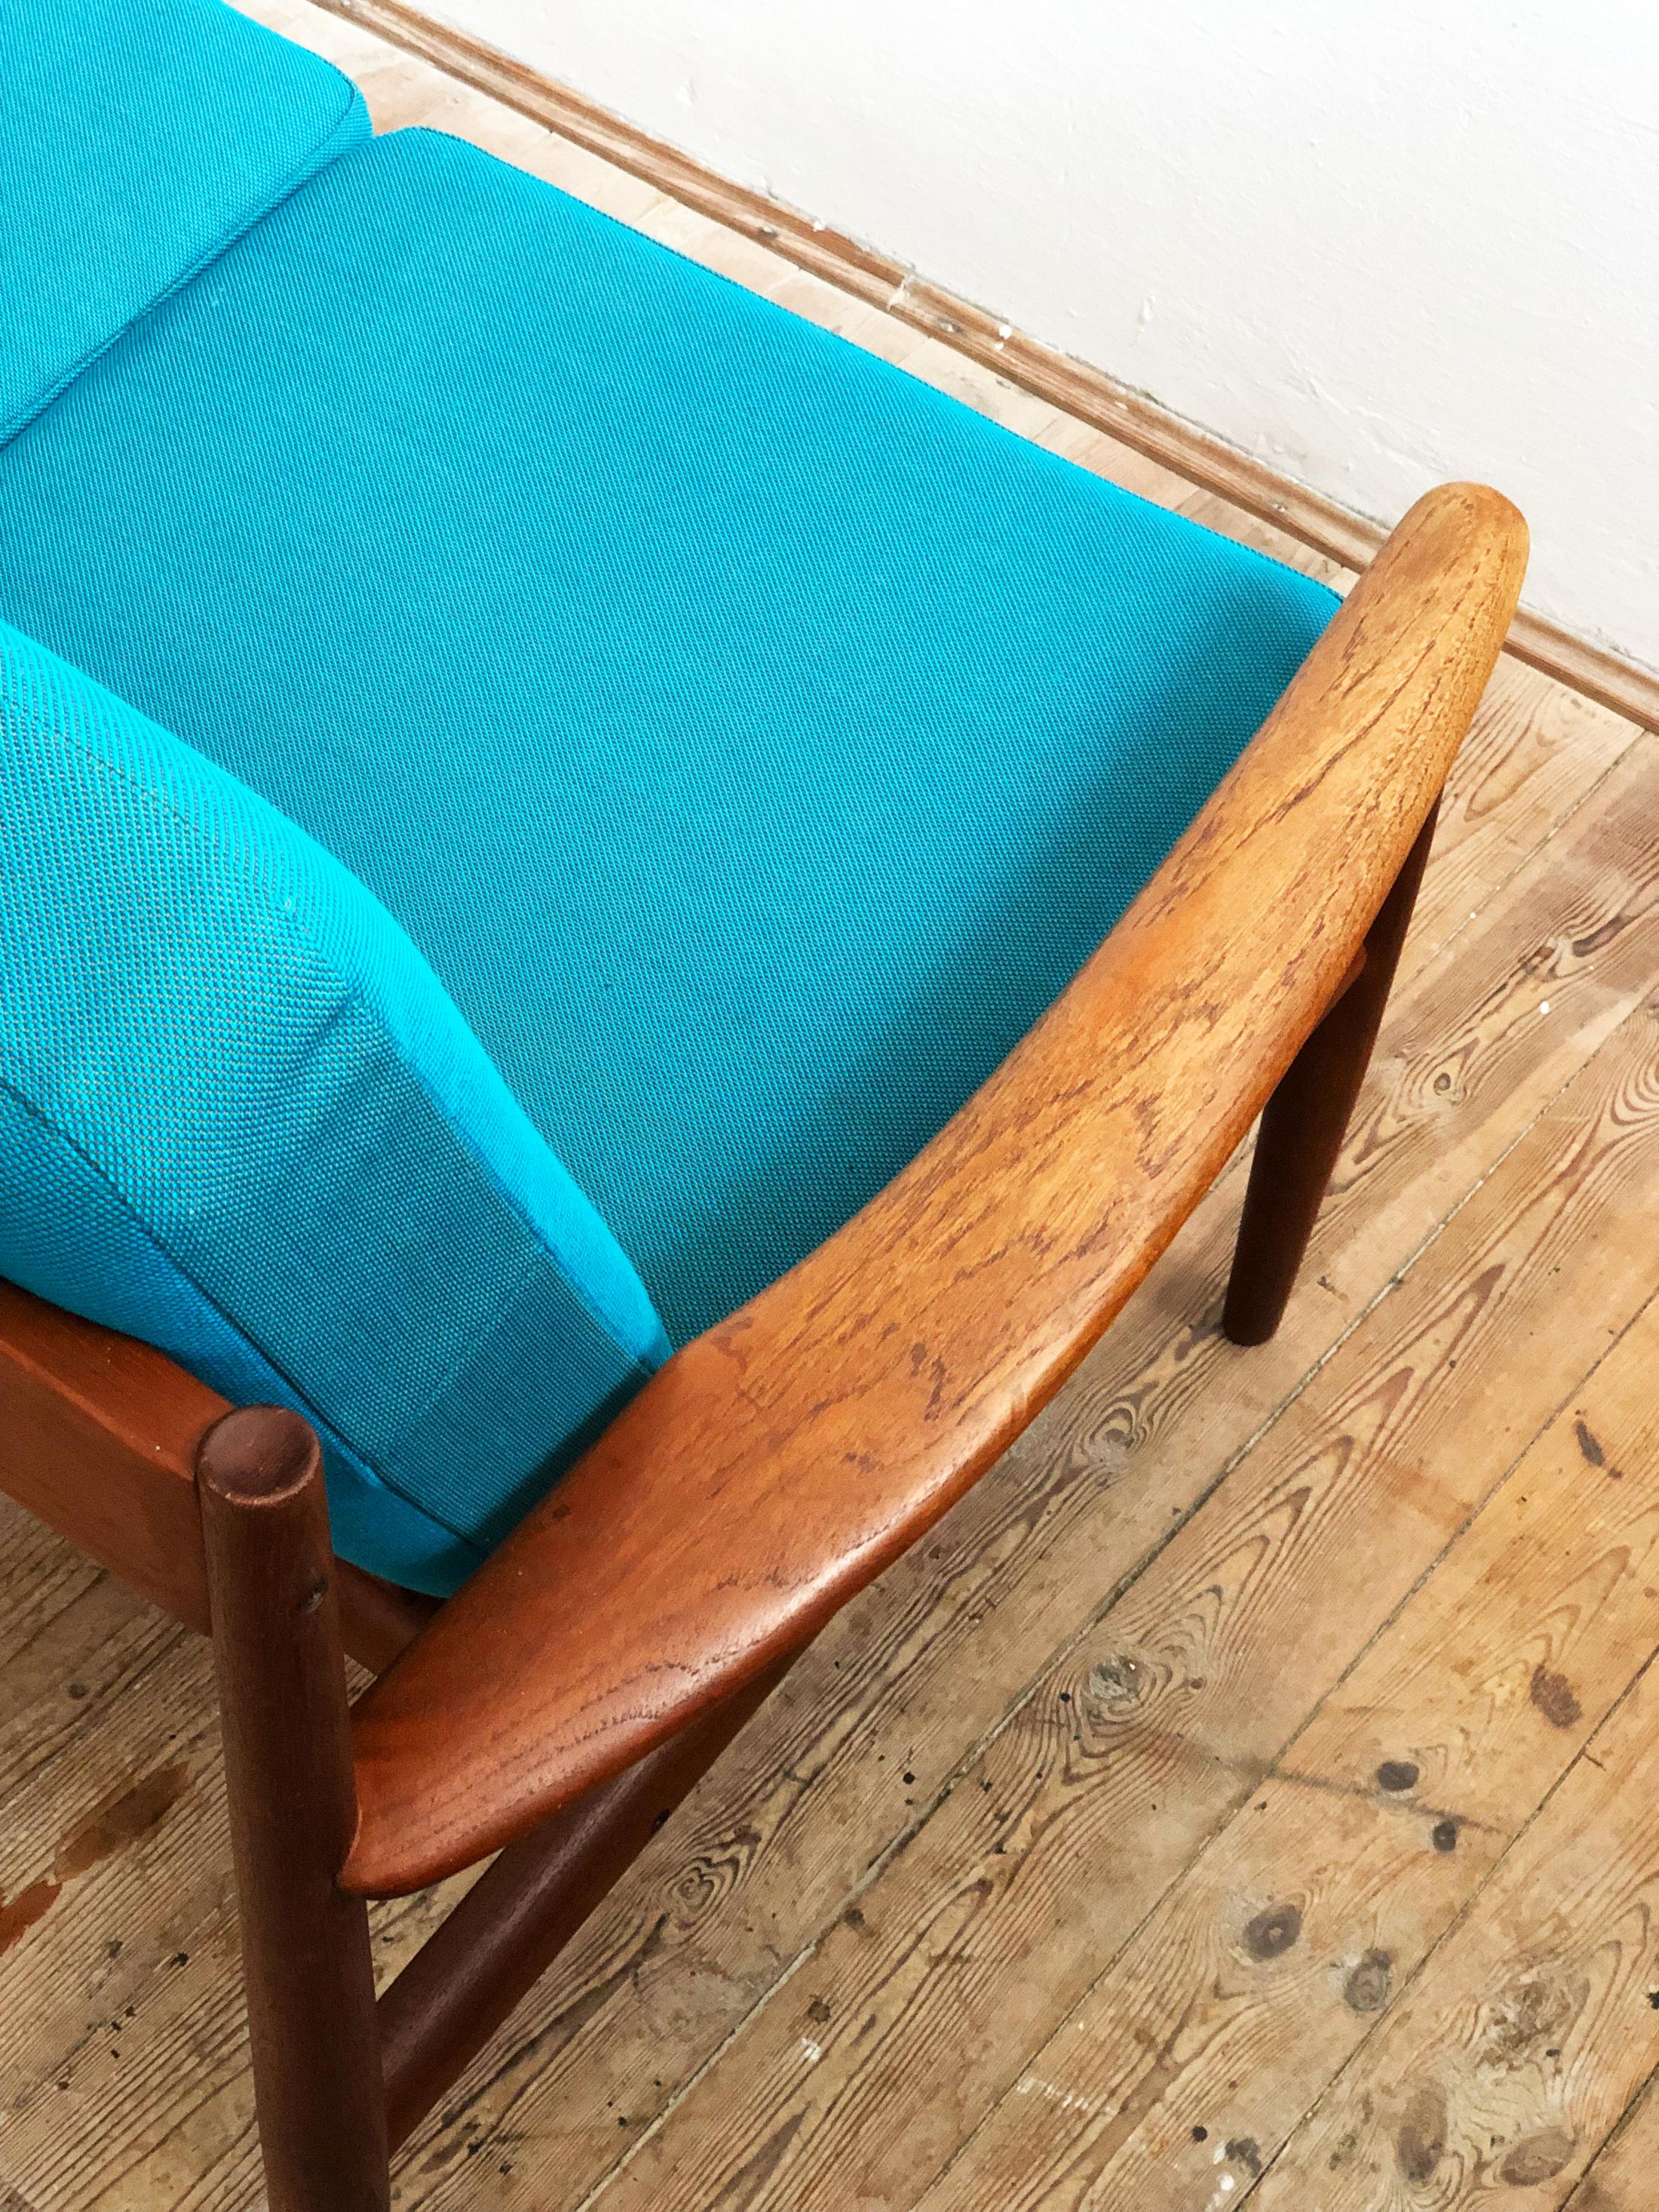 20th Century Midcentury Teak Sofa with Turquoise Upholstery by Grete Jalk for France & Son  For Sale